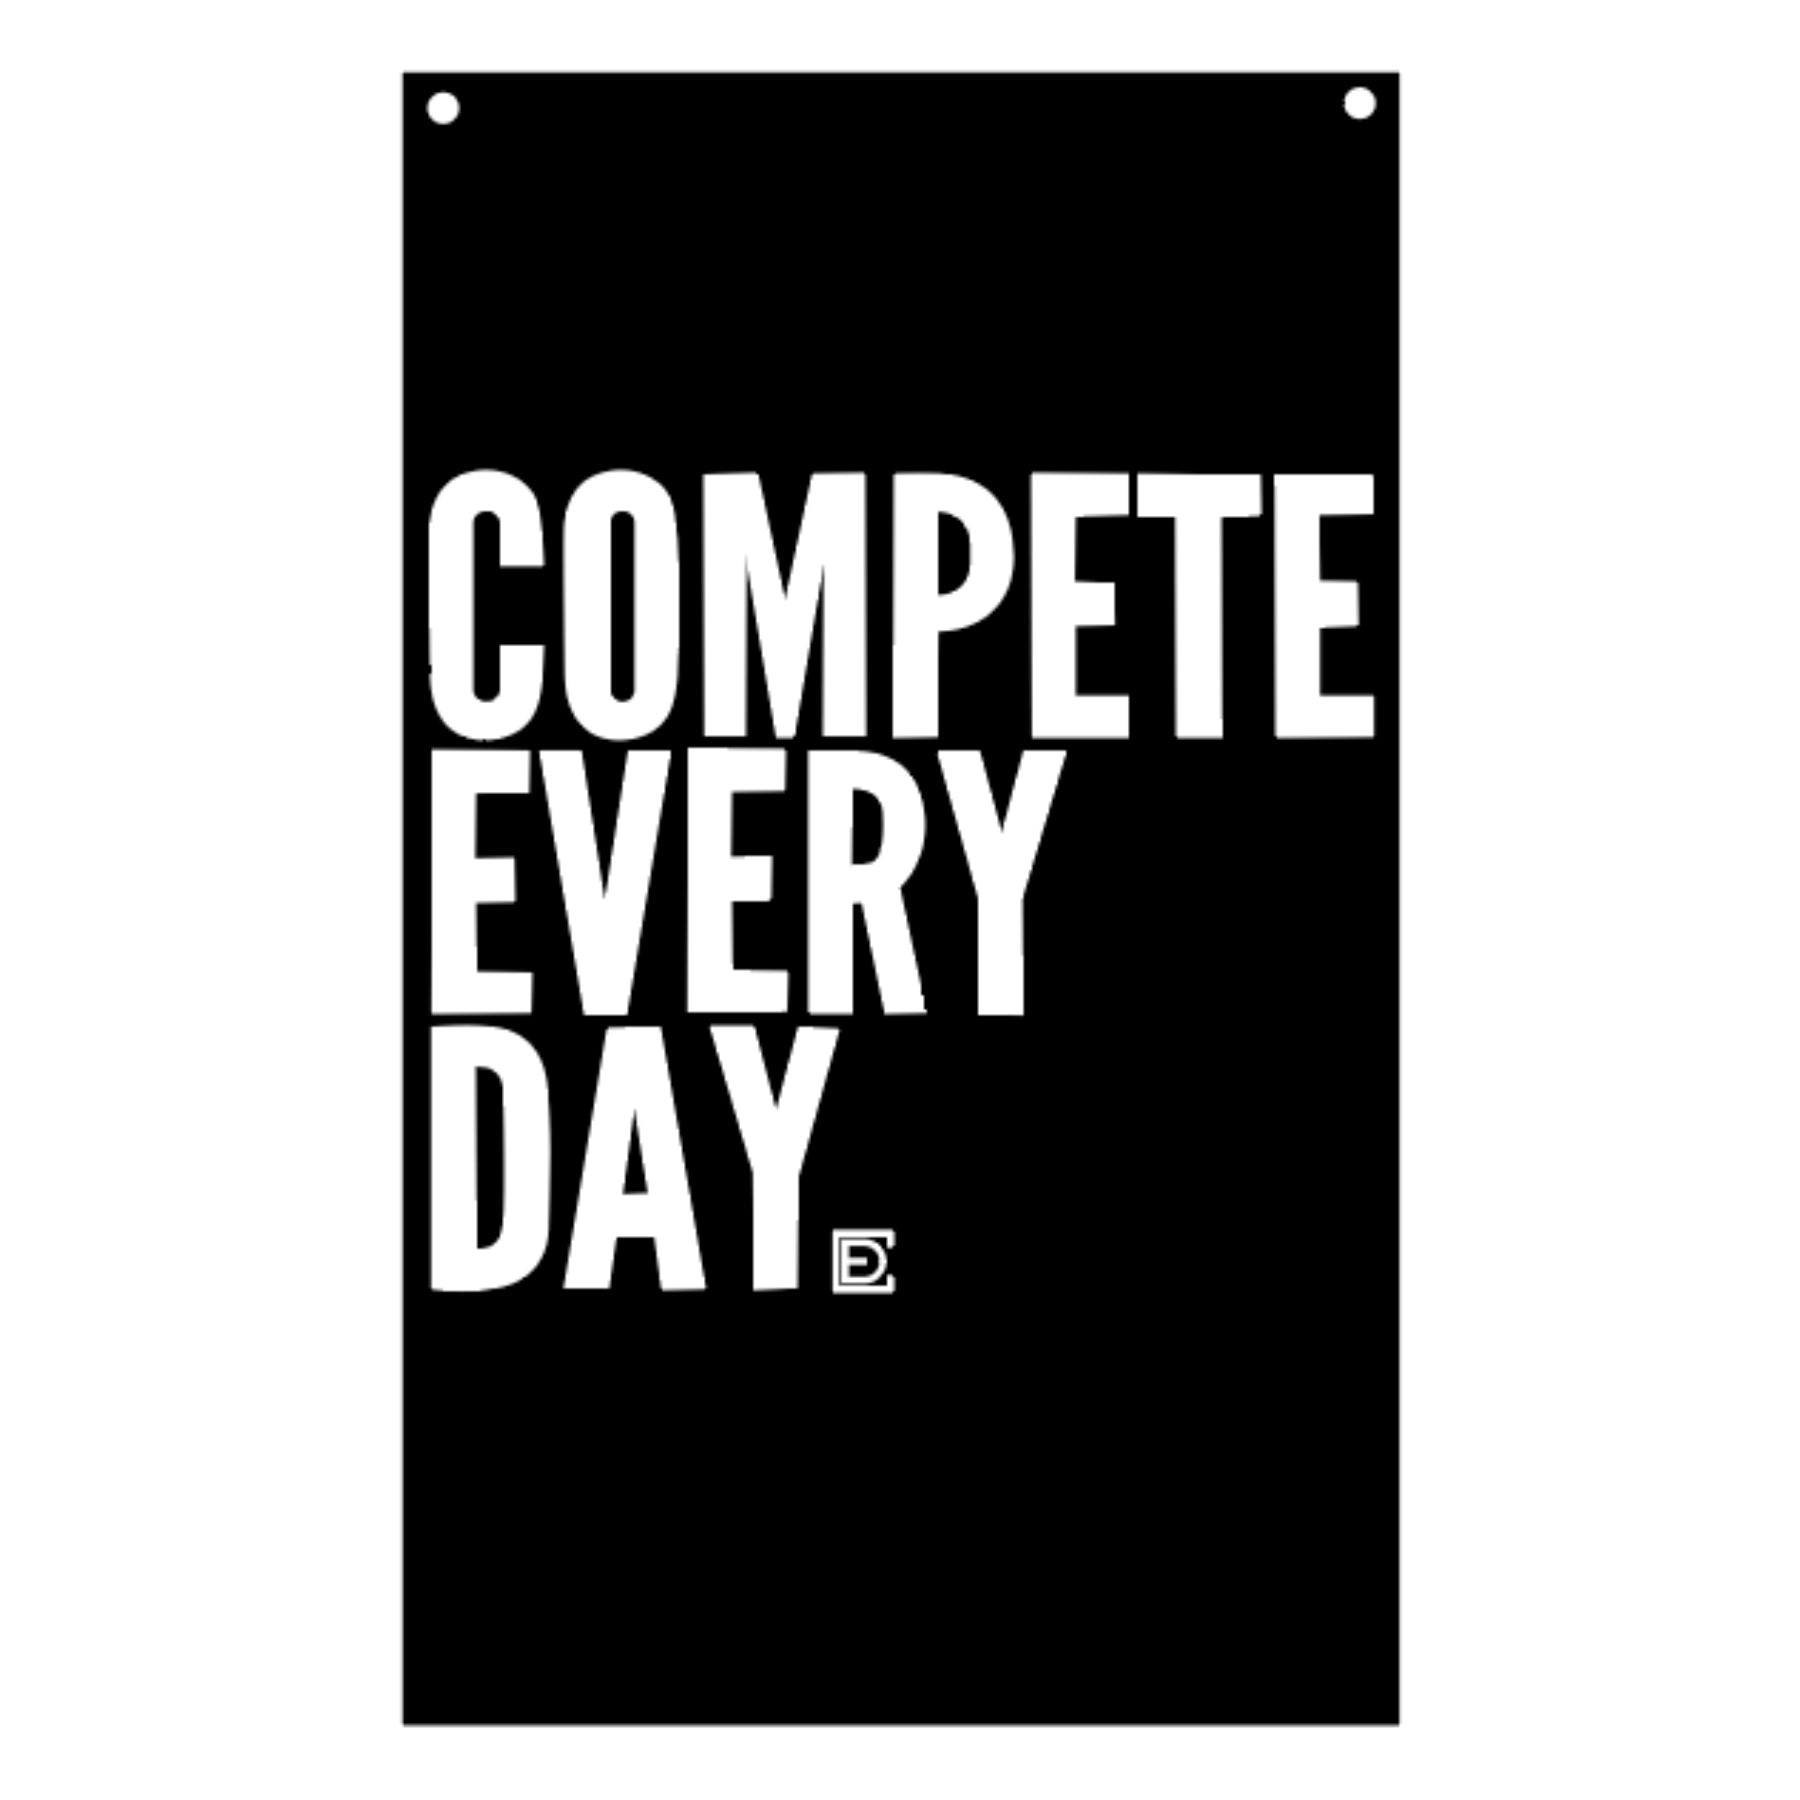 Compete Every Day black motivational flag